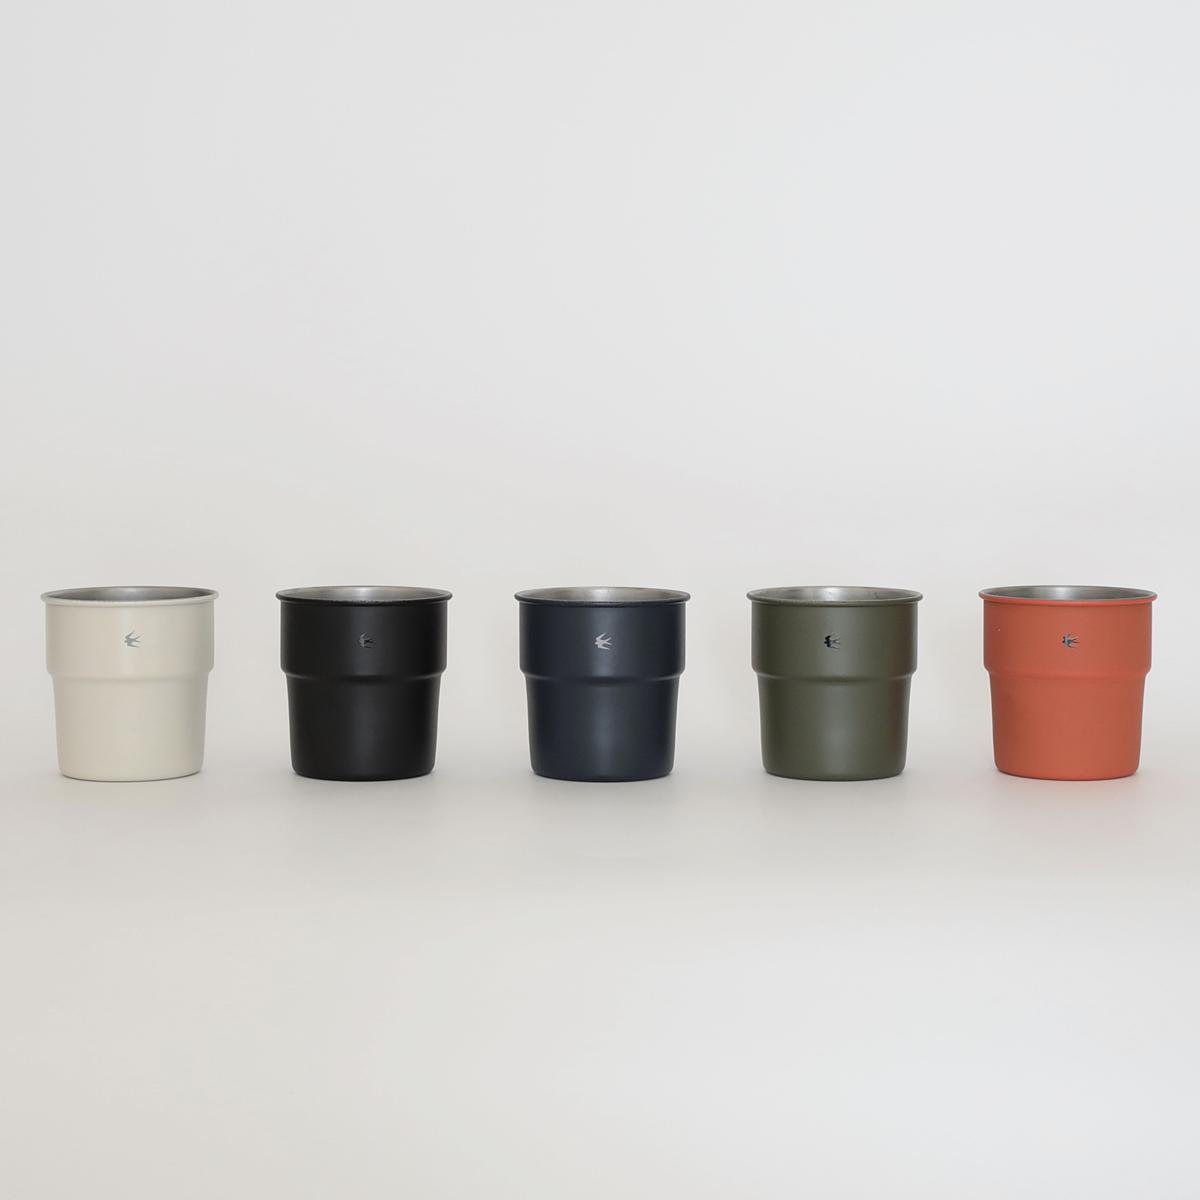 Glocal Standard Products (グローカルスタンダードプロダクツ) Tsubame (ツバメ) Stacking Cup スタッキングカップ colors